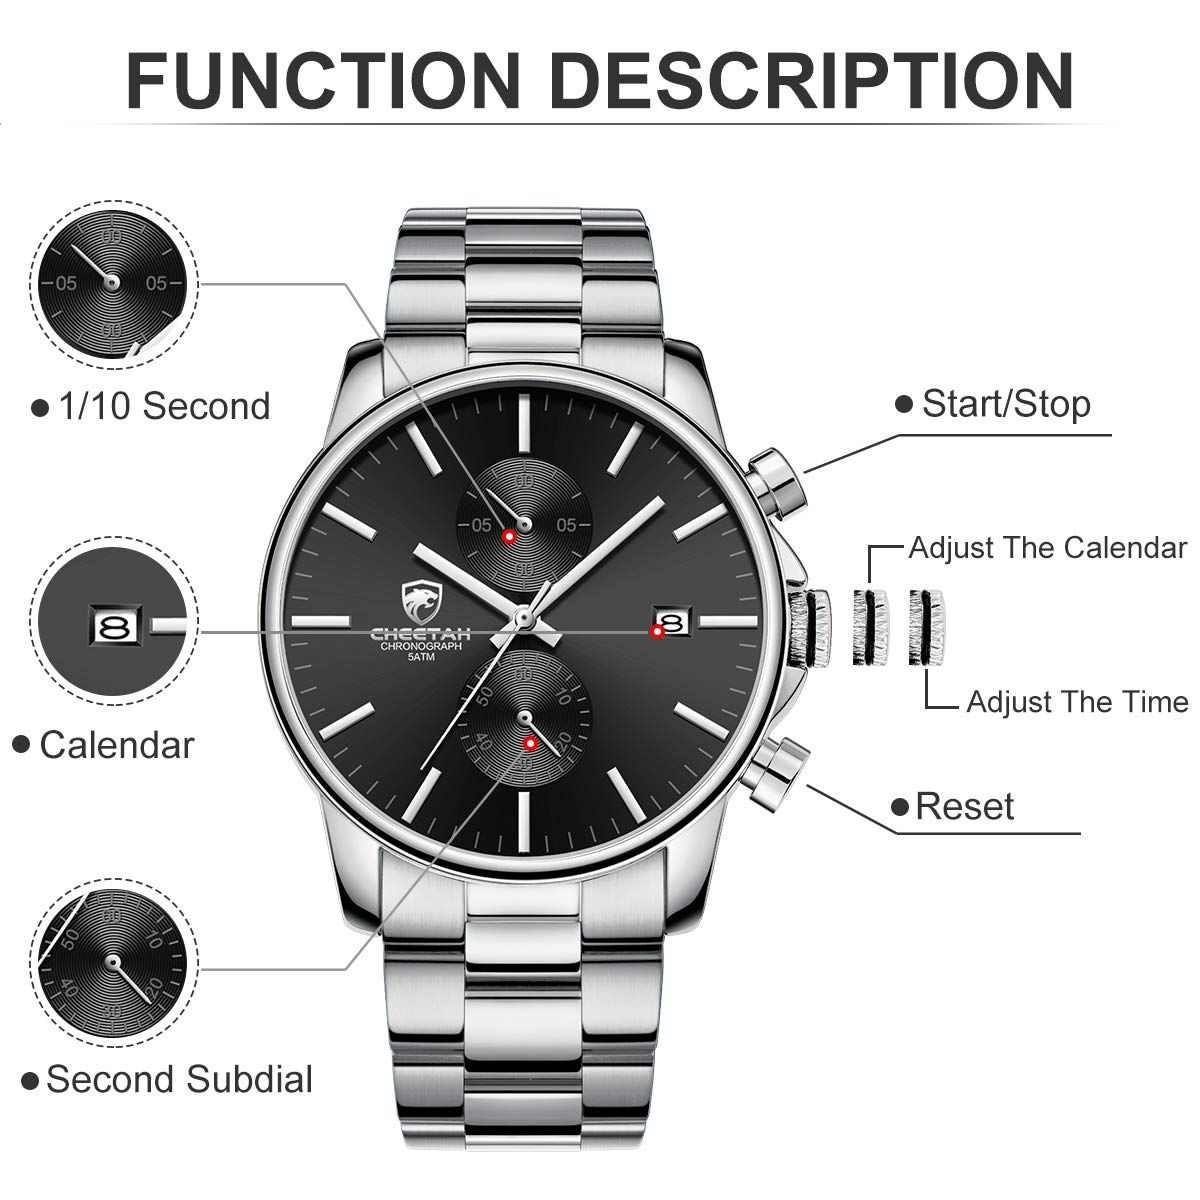 GOLDEN HOUR Fashion Business Mens Watches with Stainless Steel Waterproof Chronograph Quartz Watch for Men, Auto Date